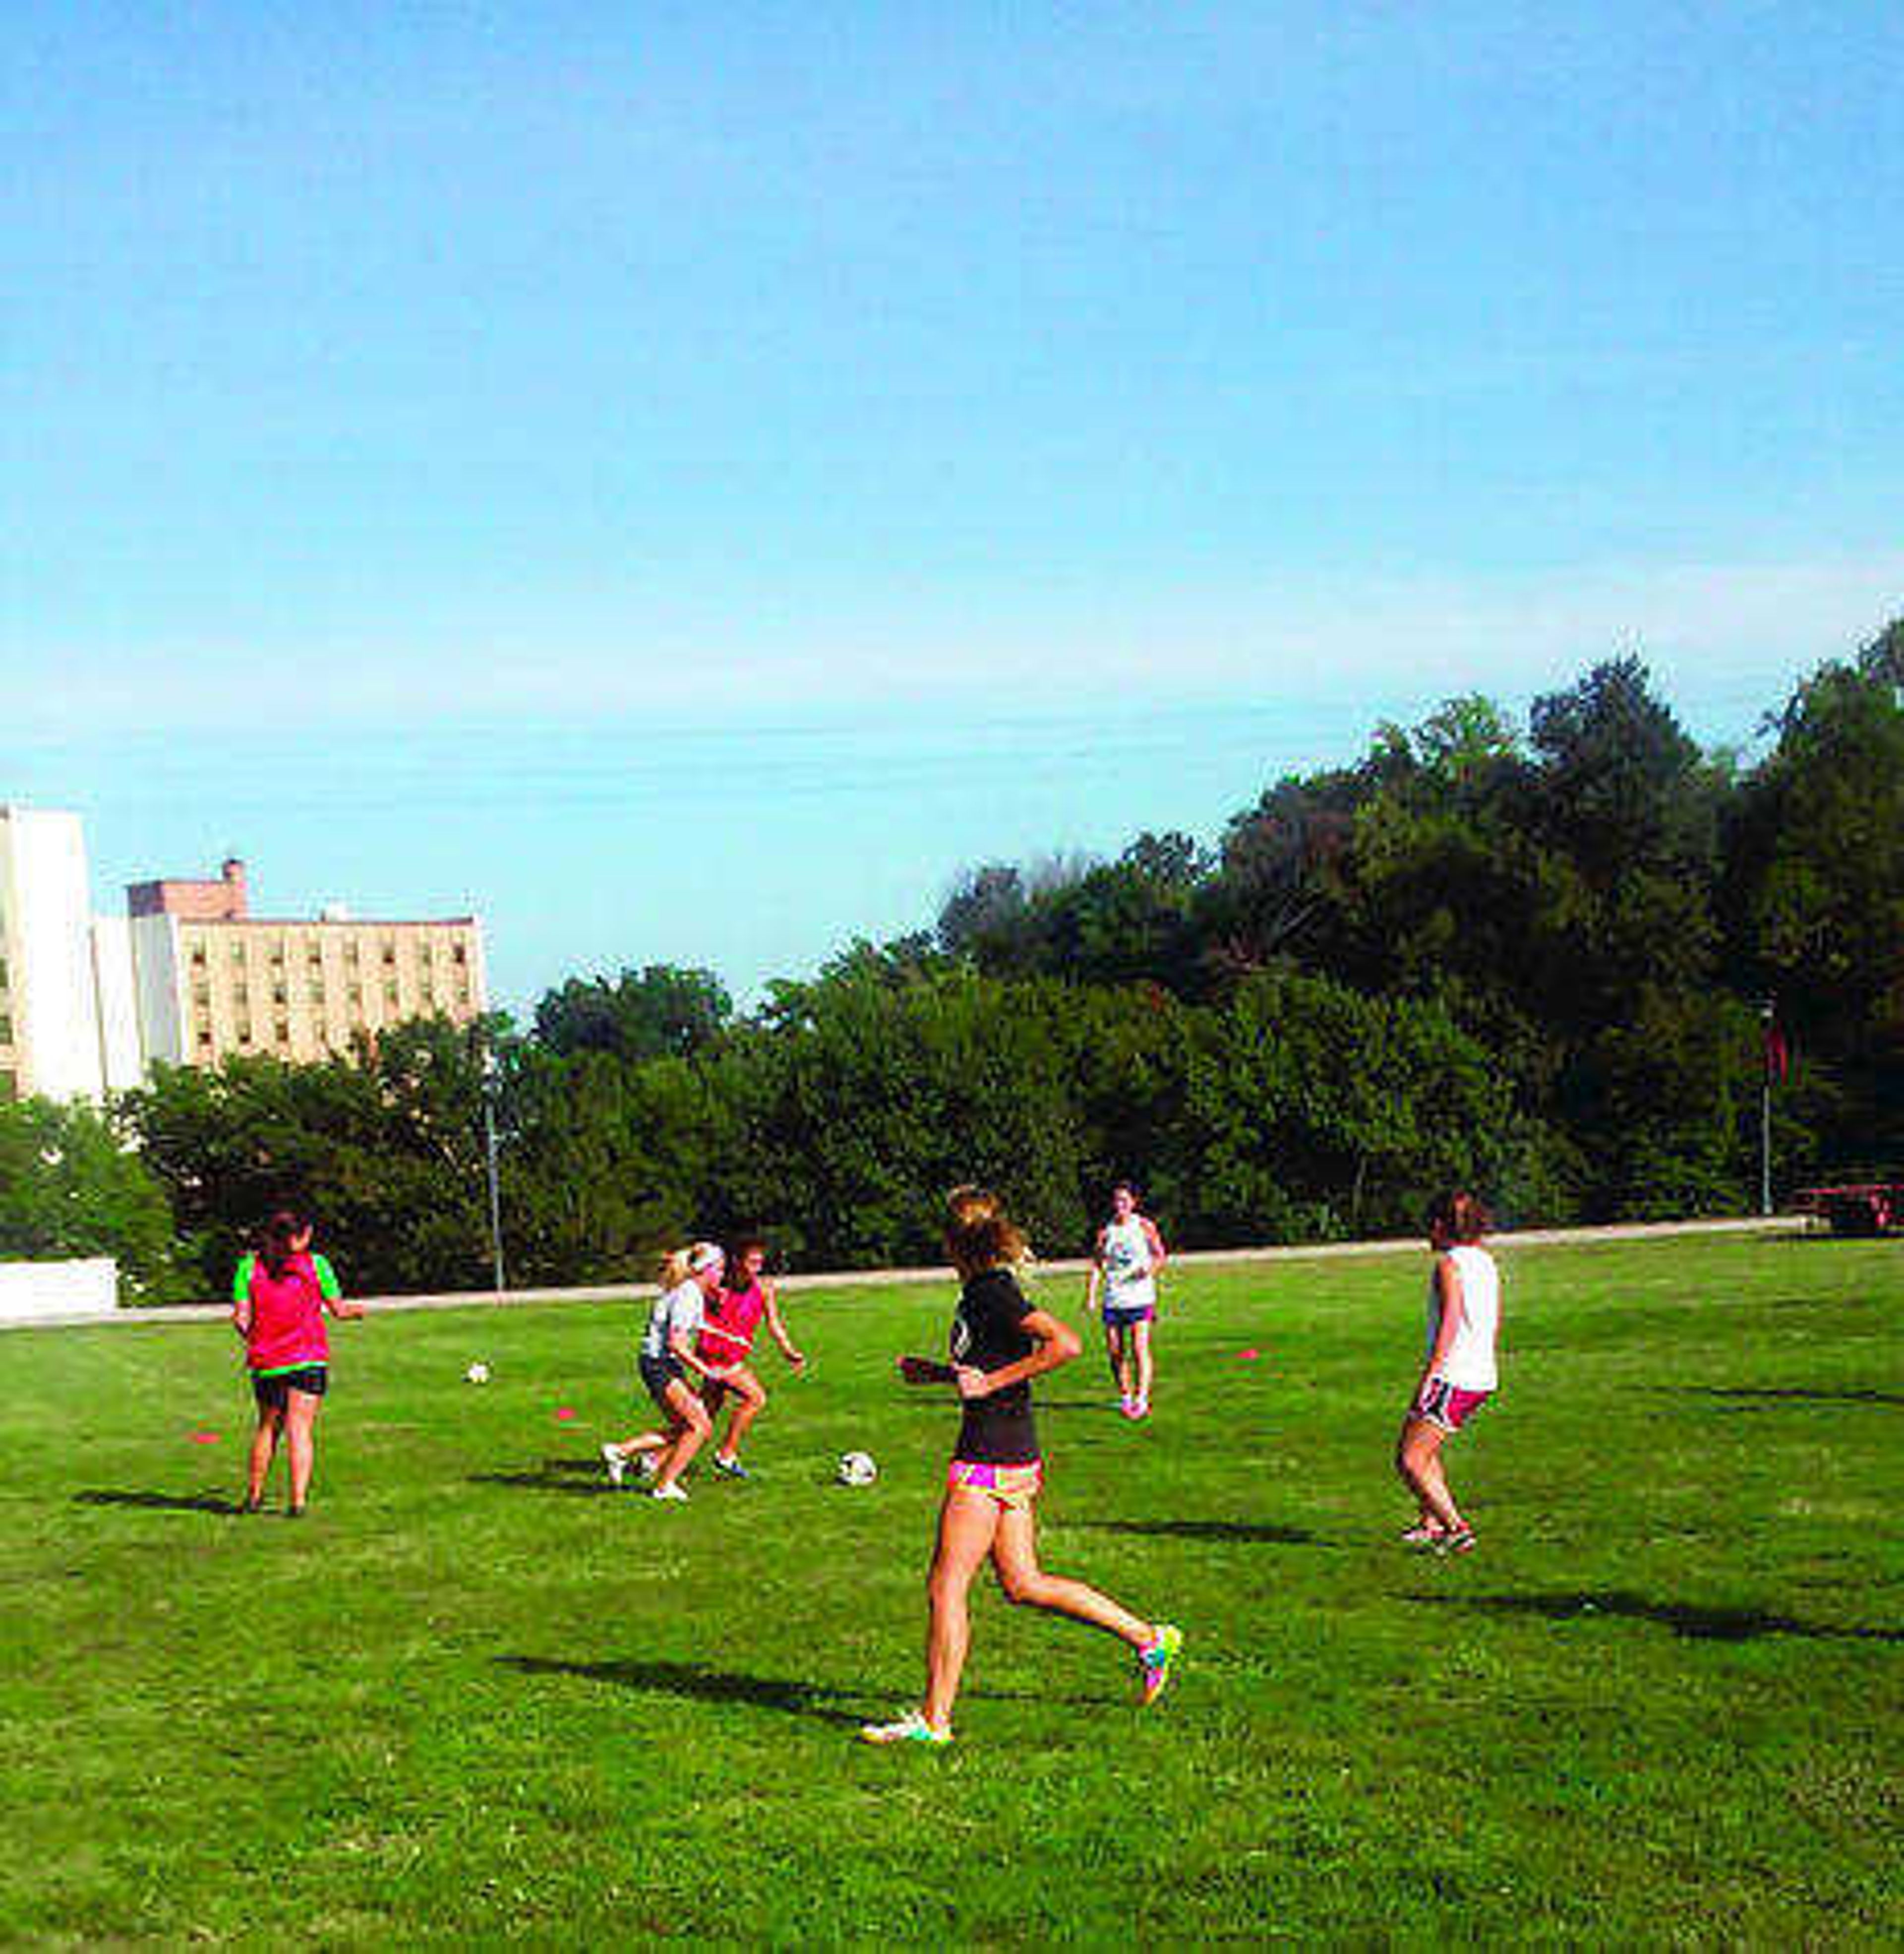 Members of the Southeast soccer club practicing at Parker Field. Submitted photo.